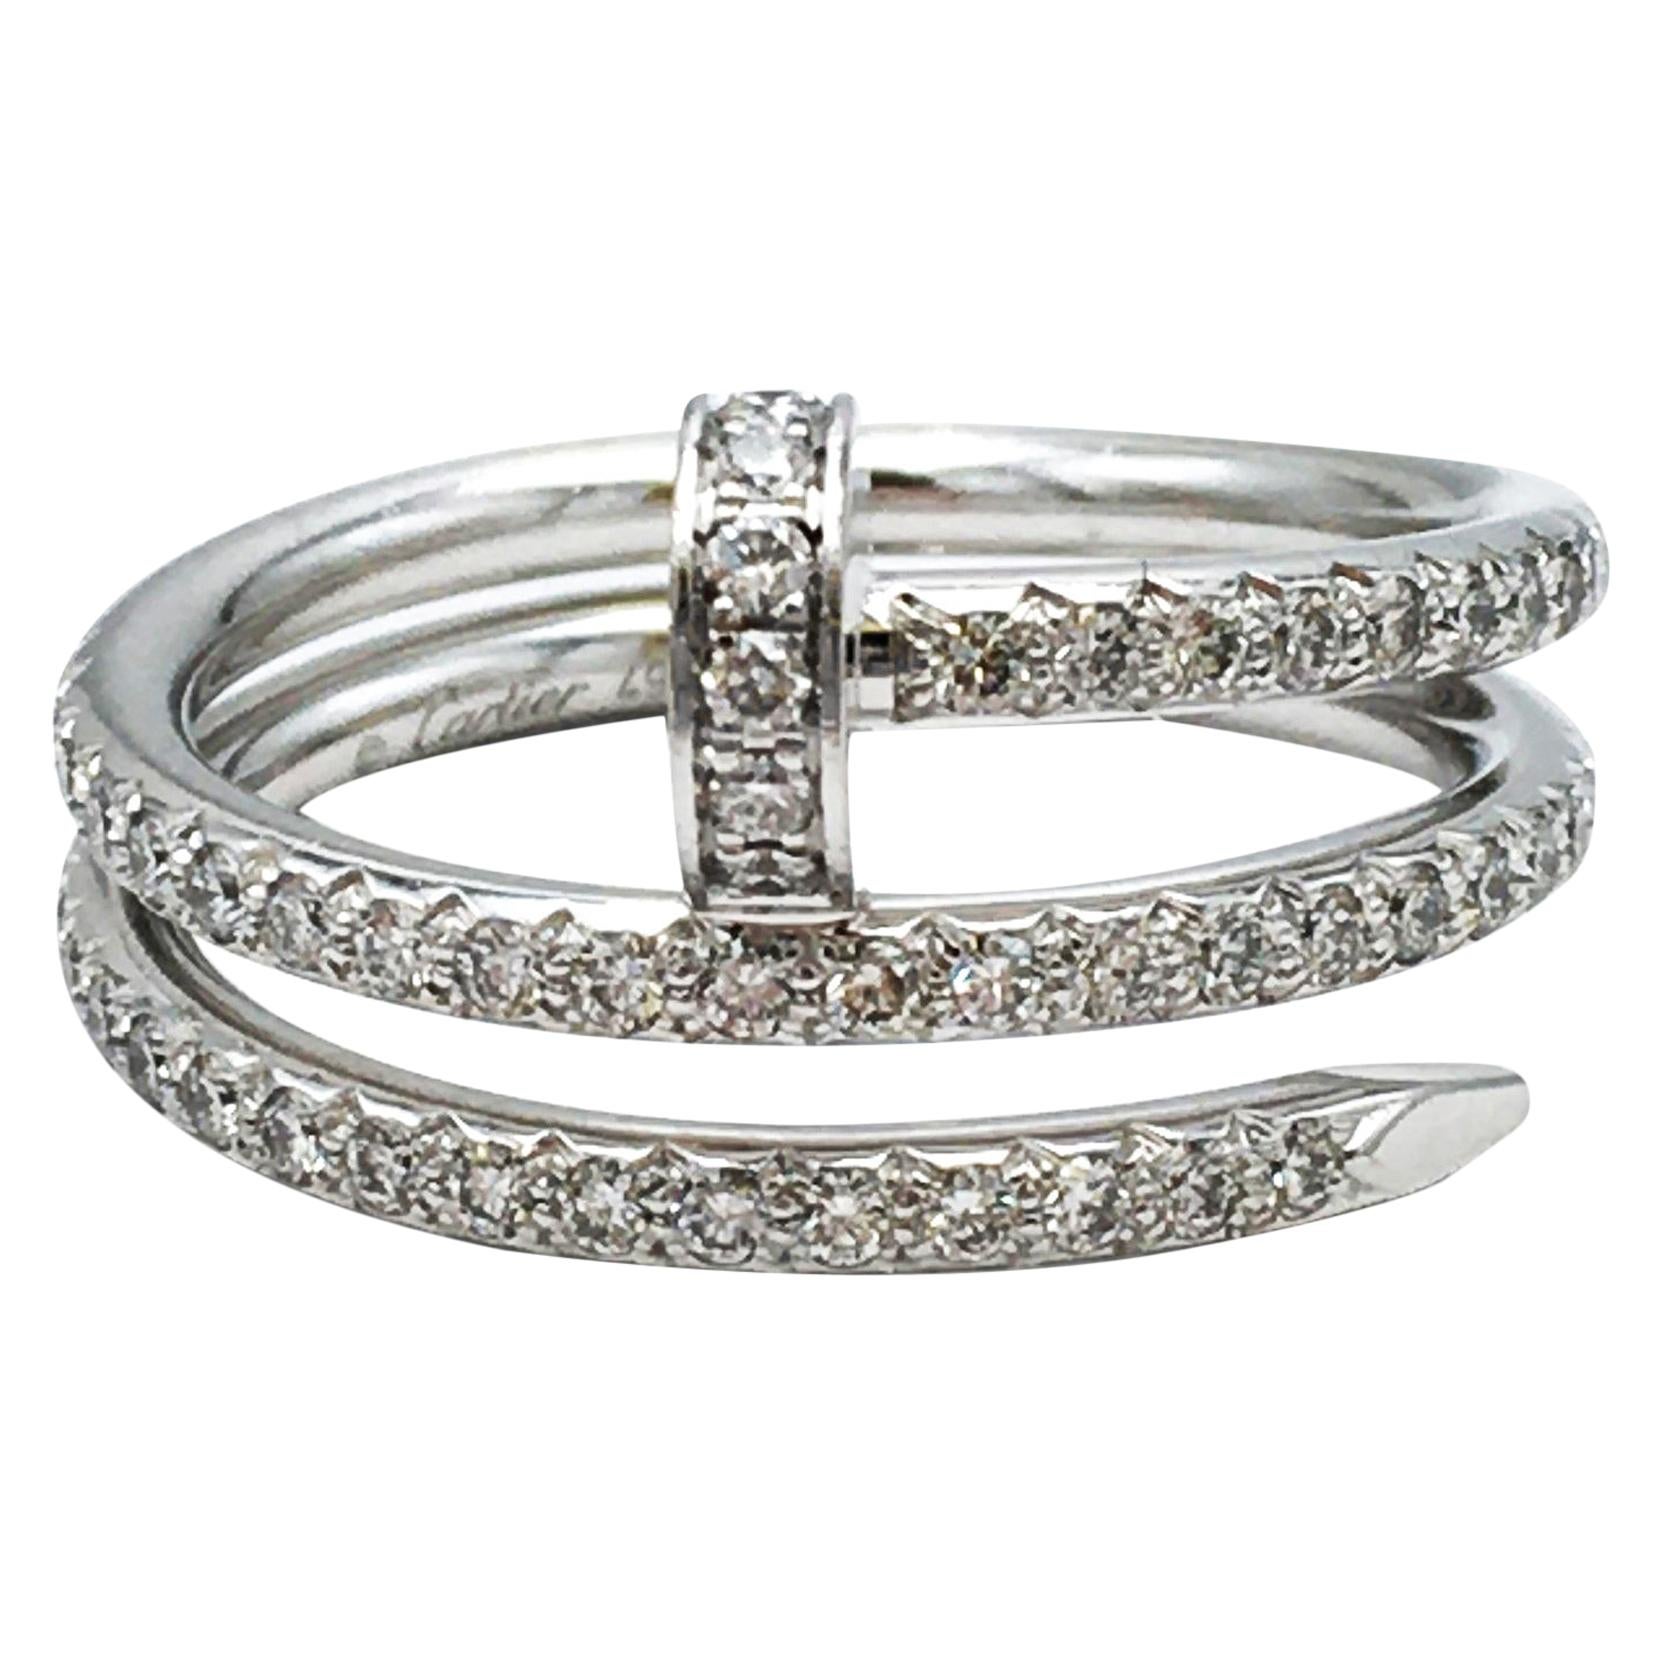 Cartier 'Juste un Clou' White Gold and Diamond Pave Ring